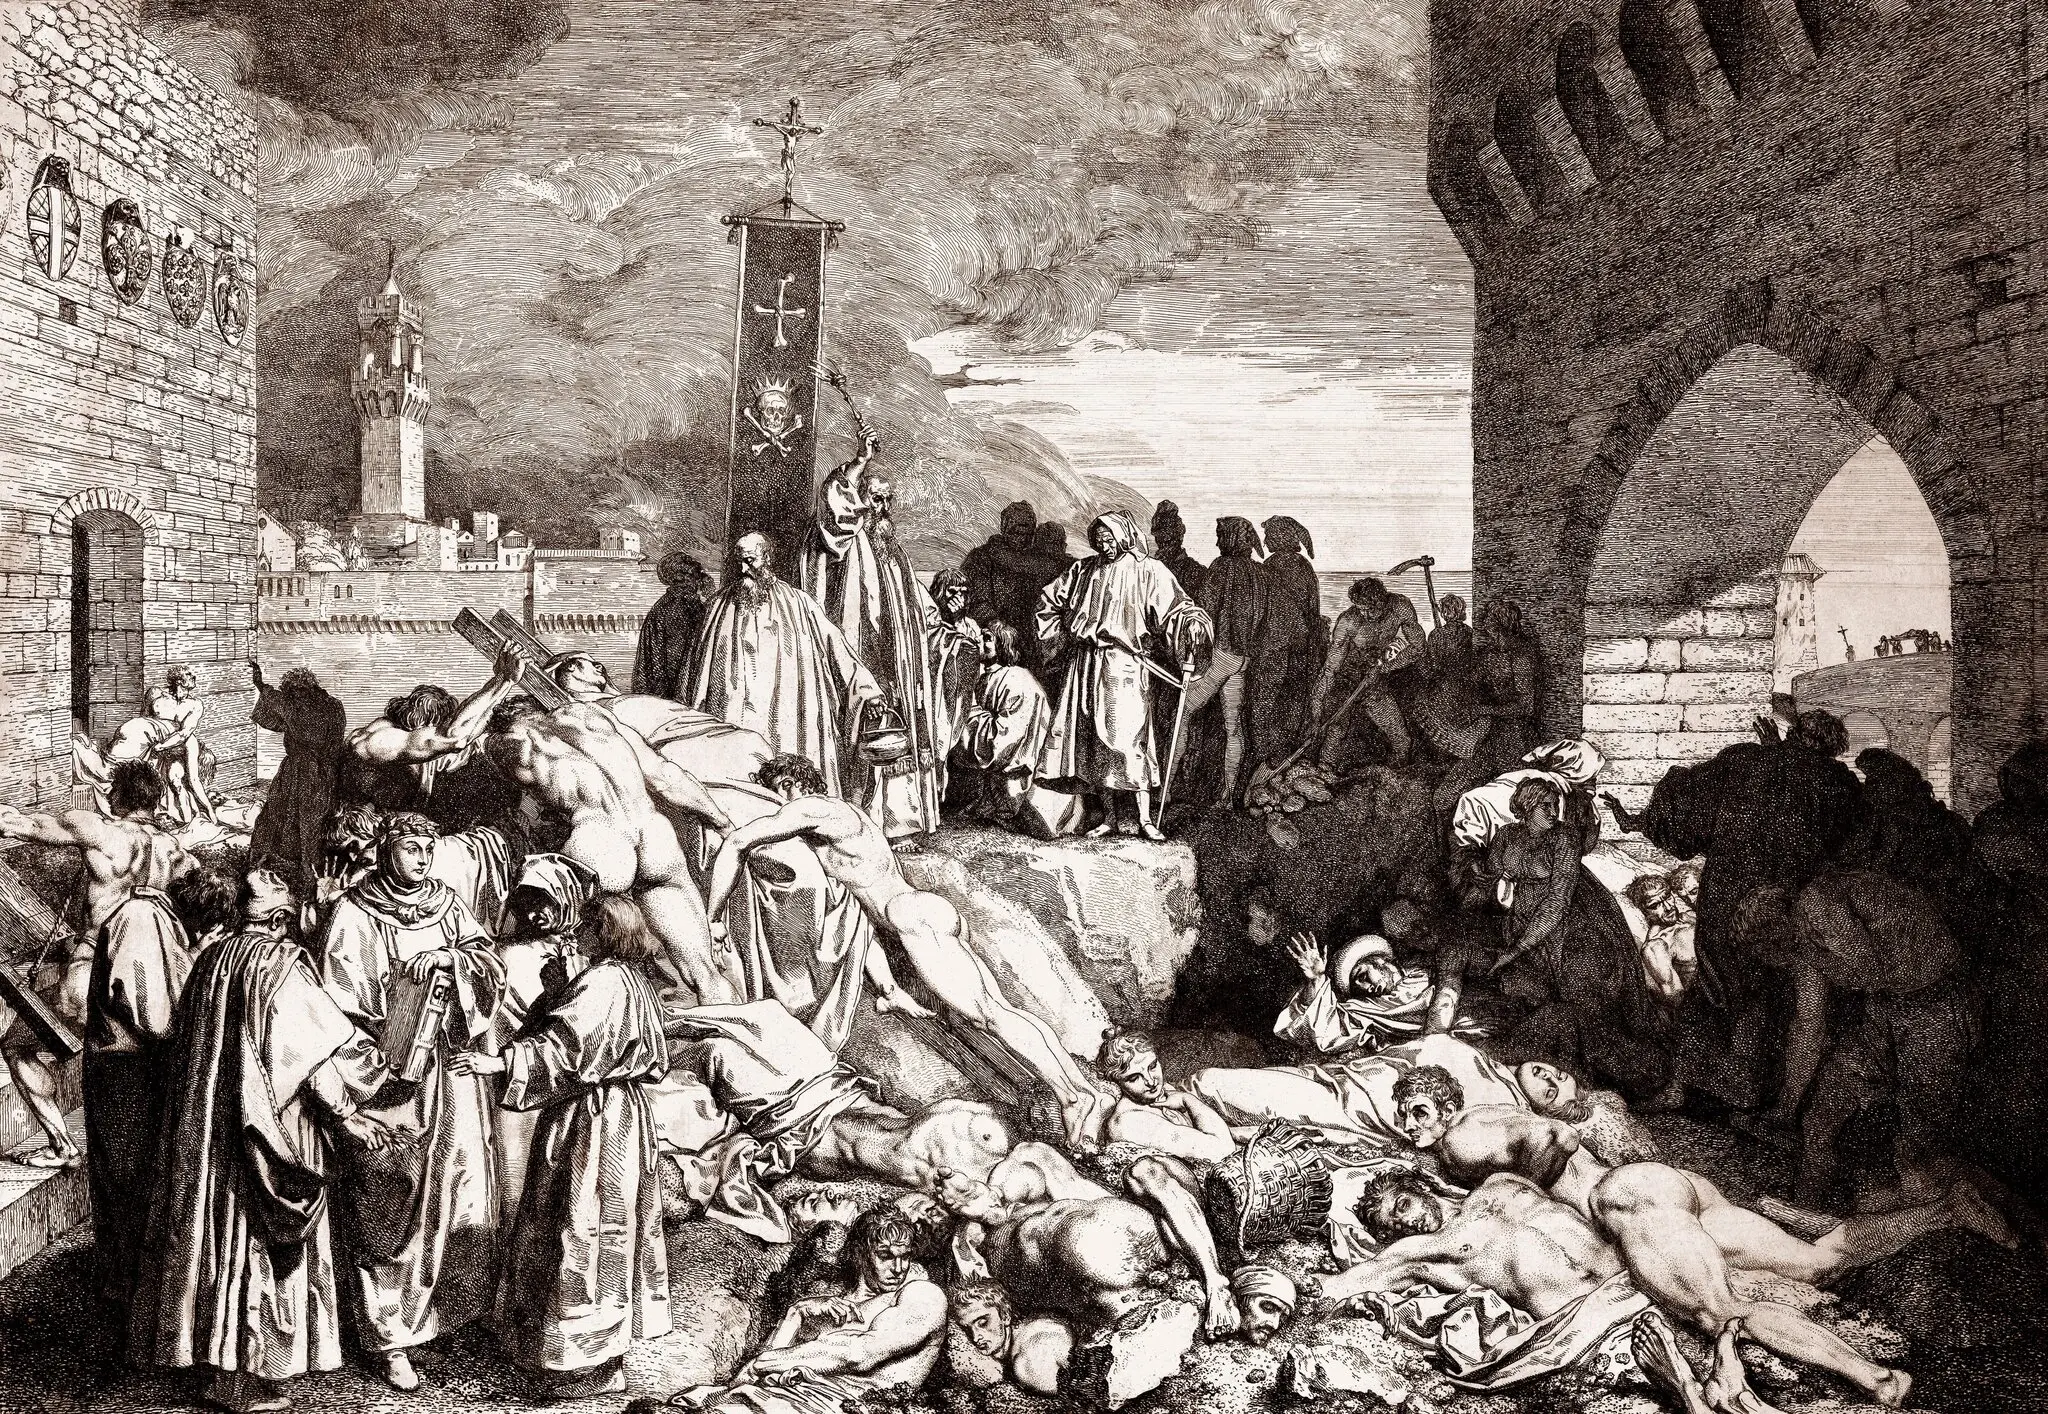 Catastrophic scene of the effects of the plague in Europe. Naked corpses laying on the streets next to paying priests.